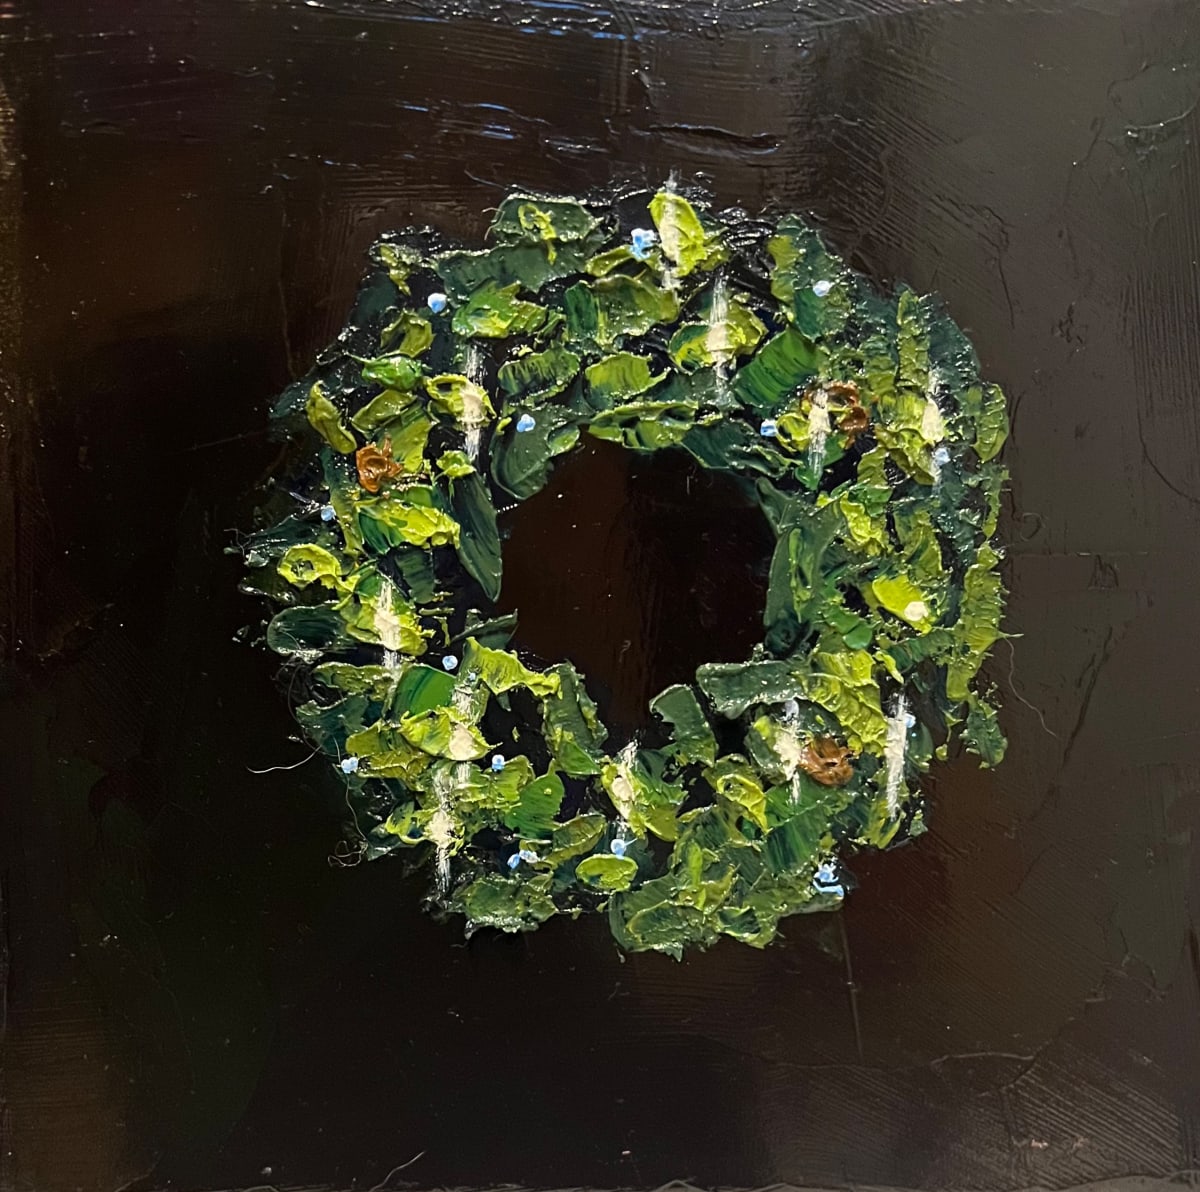 Wreath 3 by Mary Kamerer Impressionist Painting  Image: As if set against the stillness of a winter's night, these wreaths are textured paint against a nearly black palette knife background. Shades of green form a simple, natural wreath with only the sparkle of white lights illuminating from among the branches. Painted on cradled wood panel, these original artworks are able to stand kn their own on a table or bookshelf or can be hung on a wall, as their edges are finished in metallic gold oil paint. Limited edition of four.